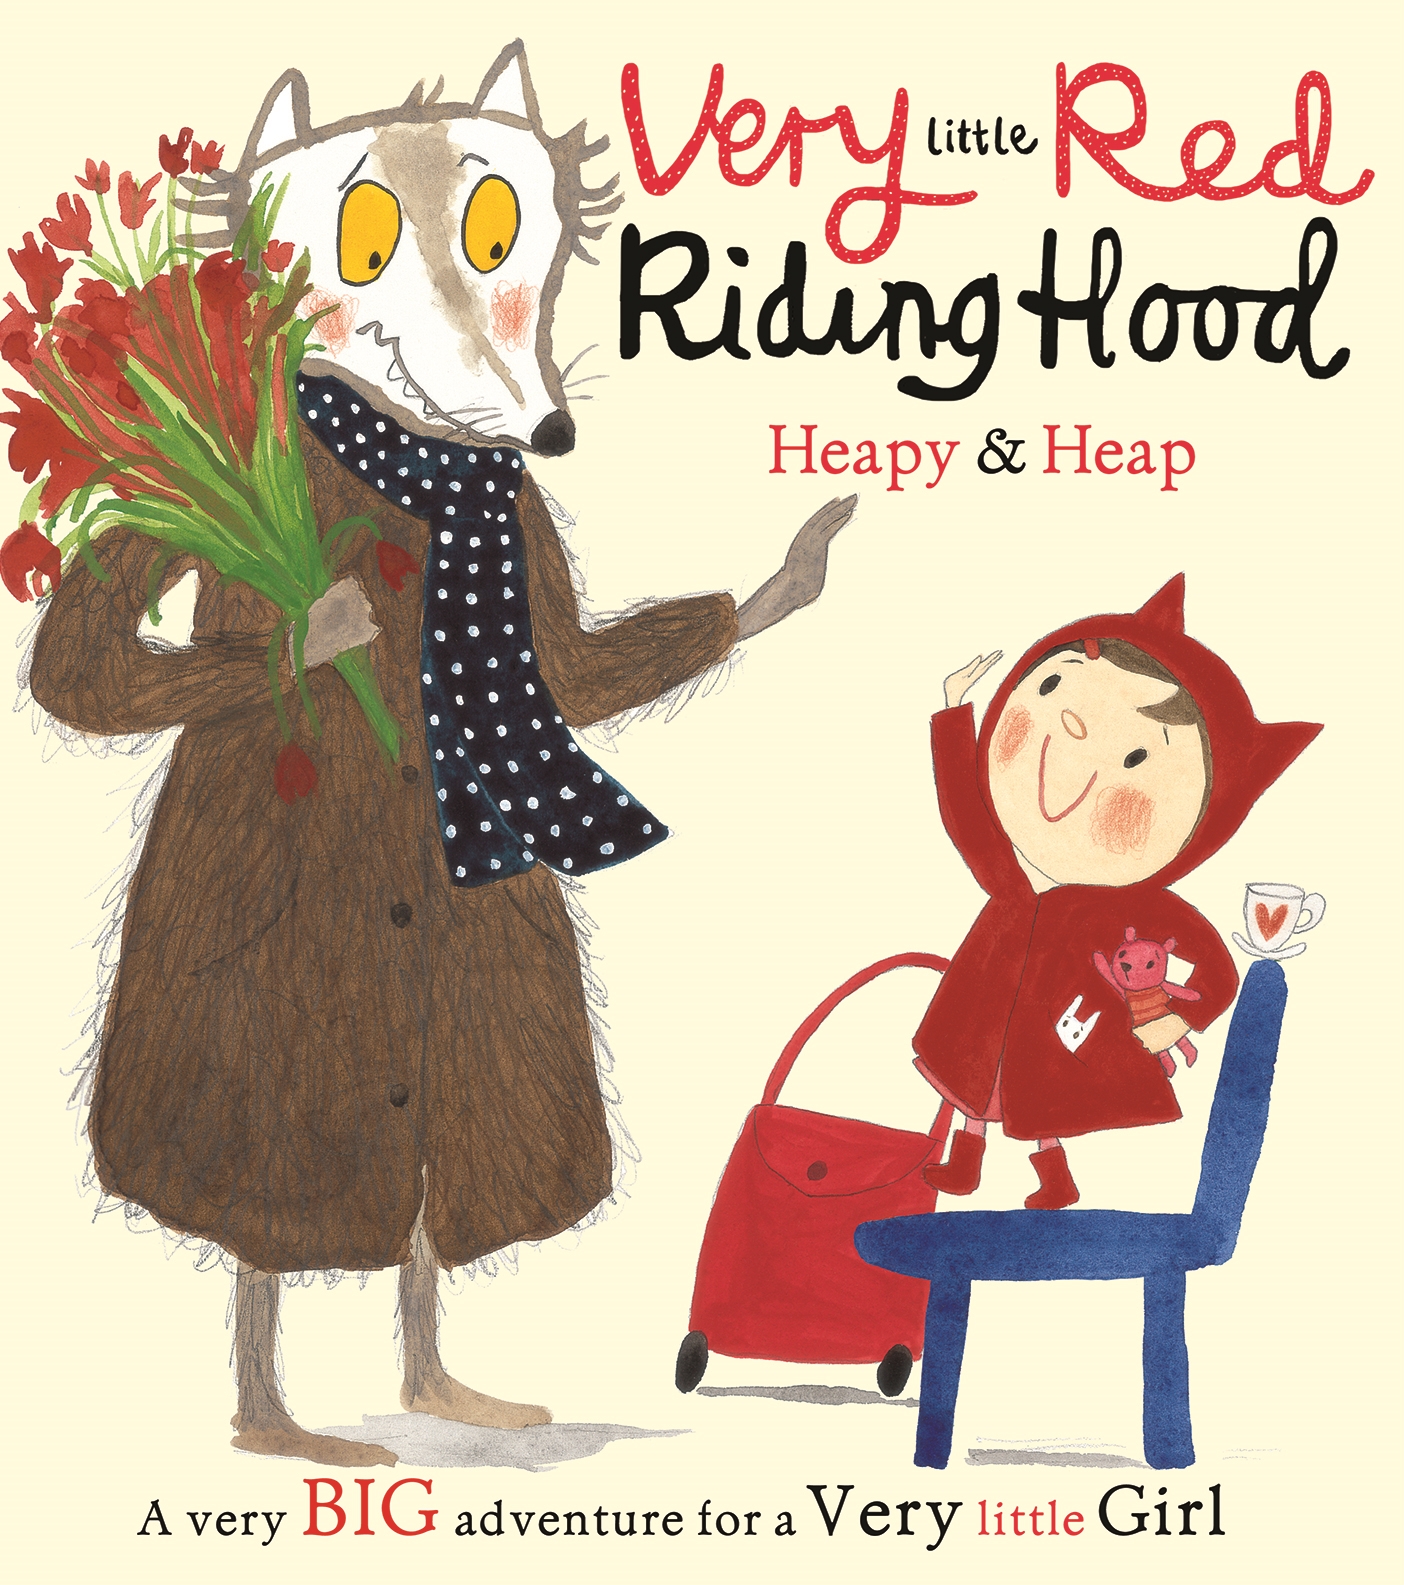 Very Little Red Riding Hood by Teresa Heapy - Penguin Books New Zealand